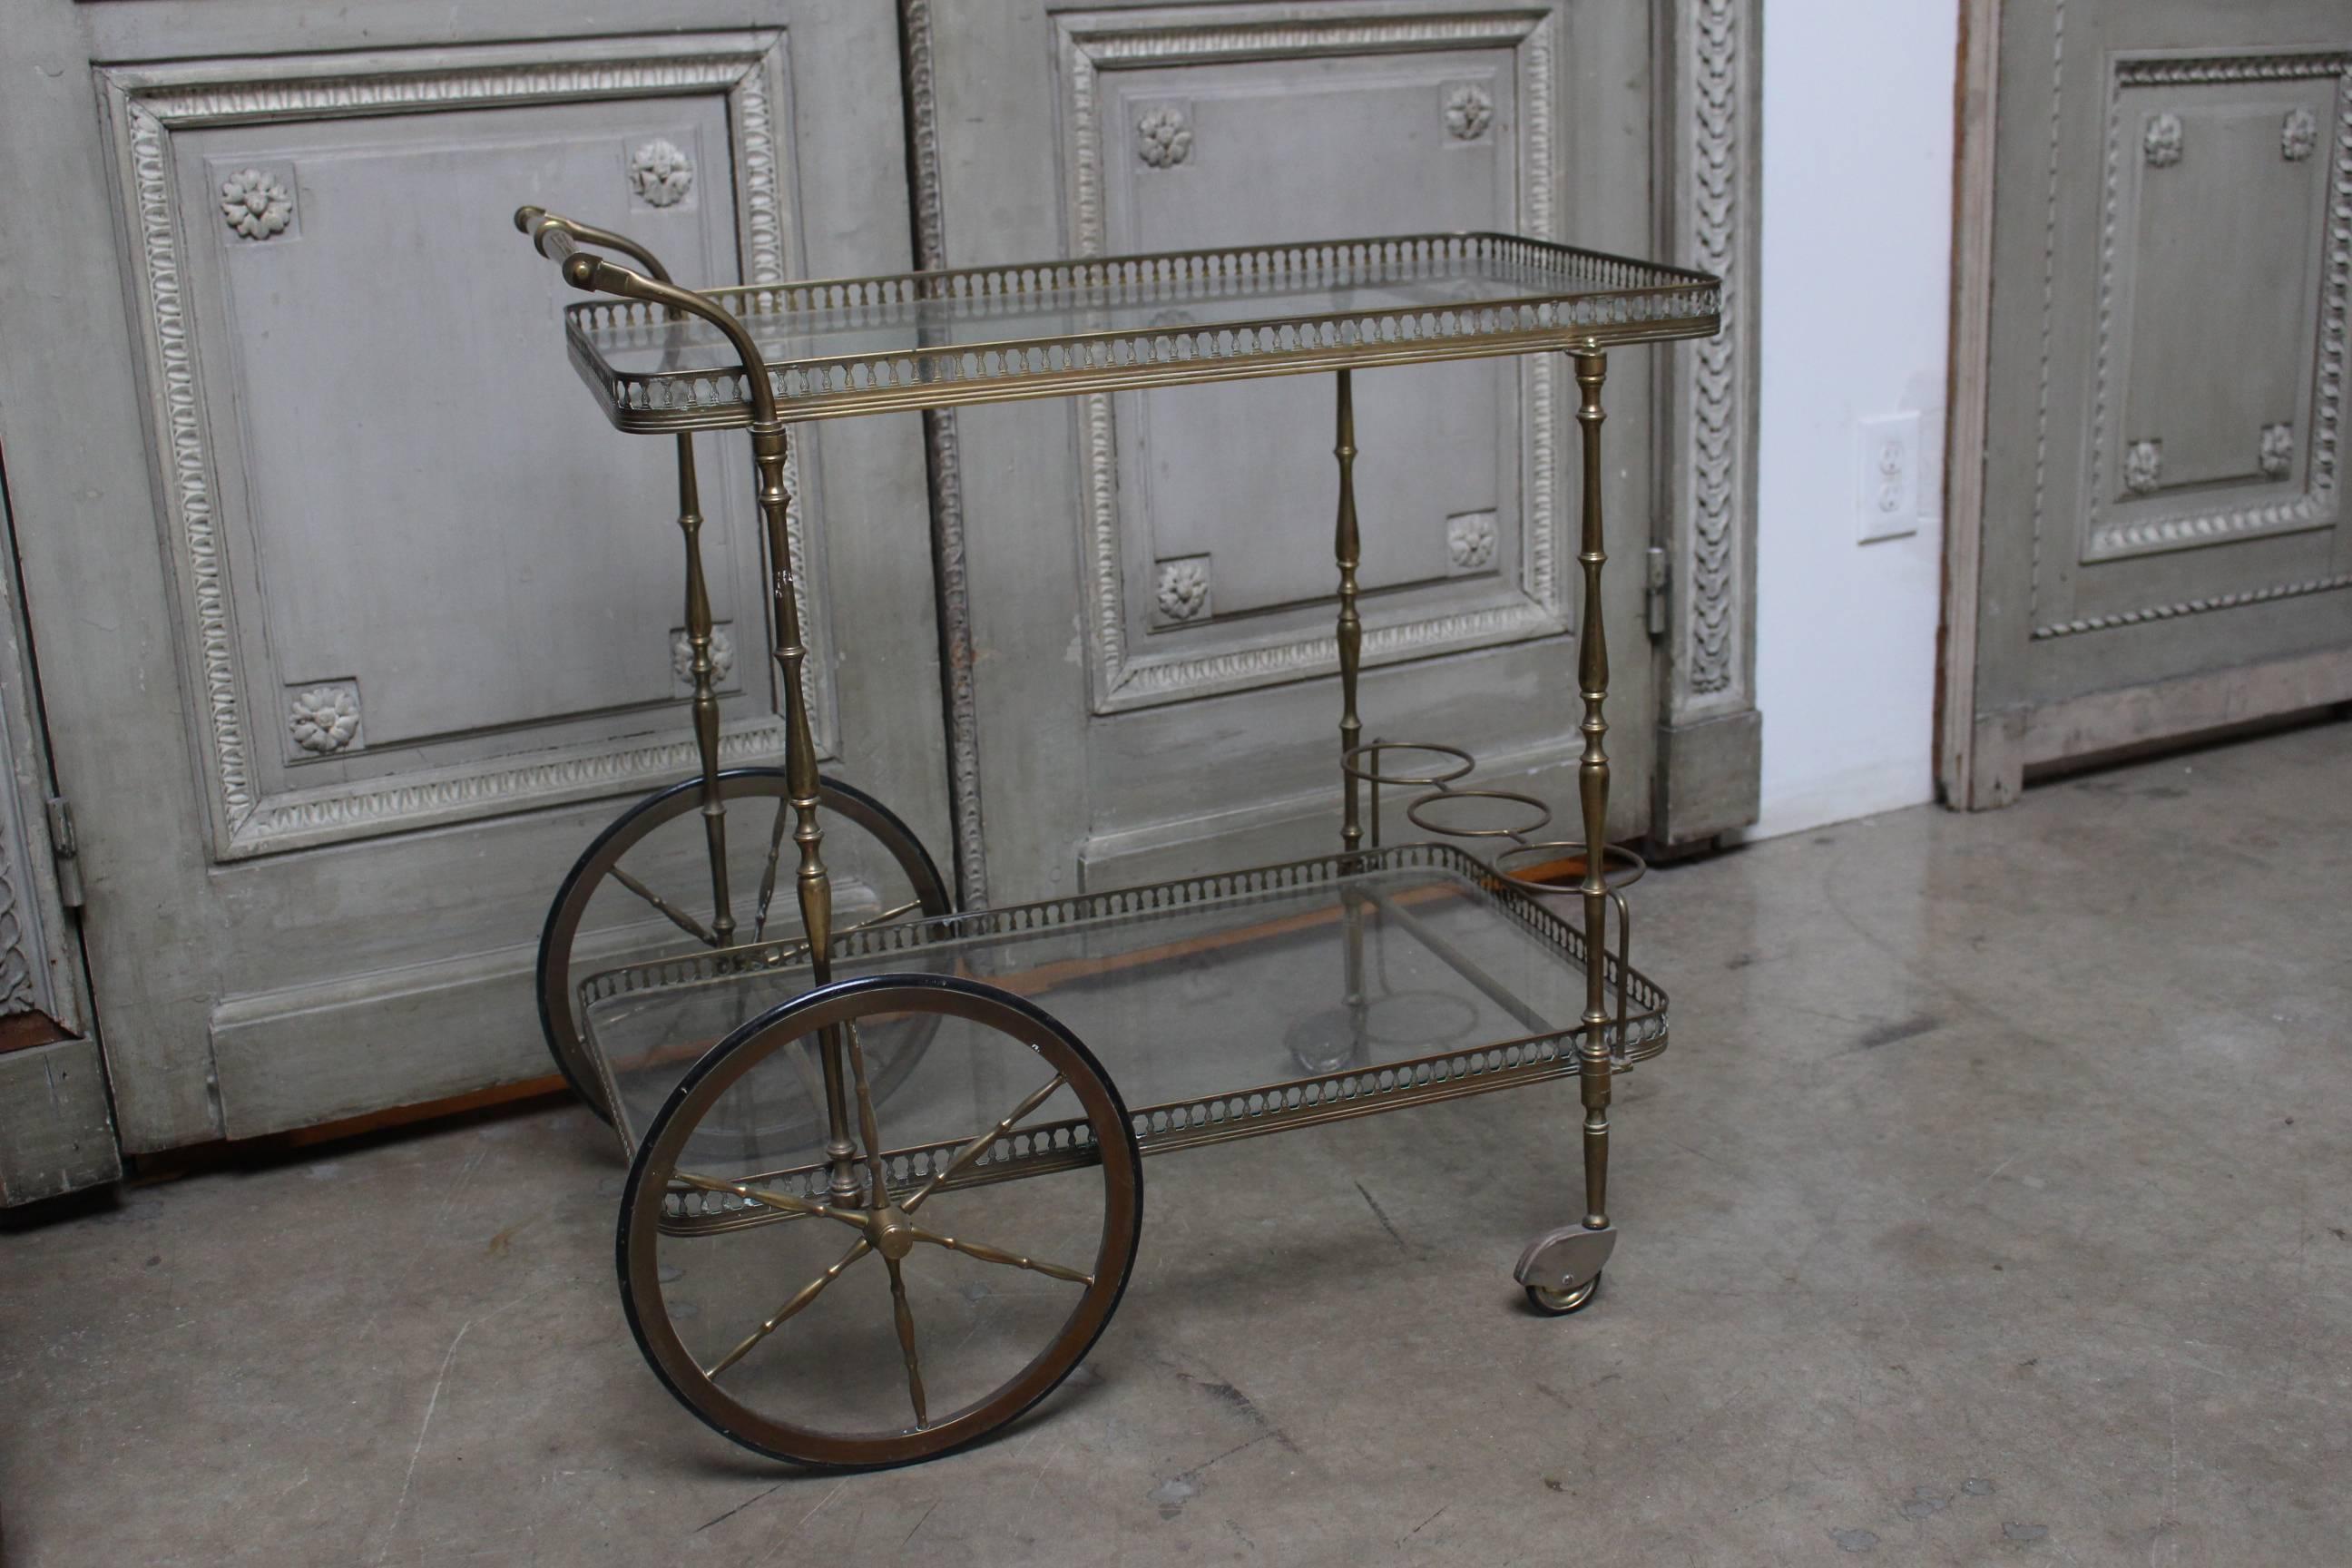 An English brass and glass bar cart with rubber wheels dating from the early 20th century.  It is very sturdy and useful and is highly decorative.  
